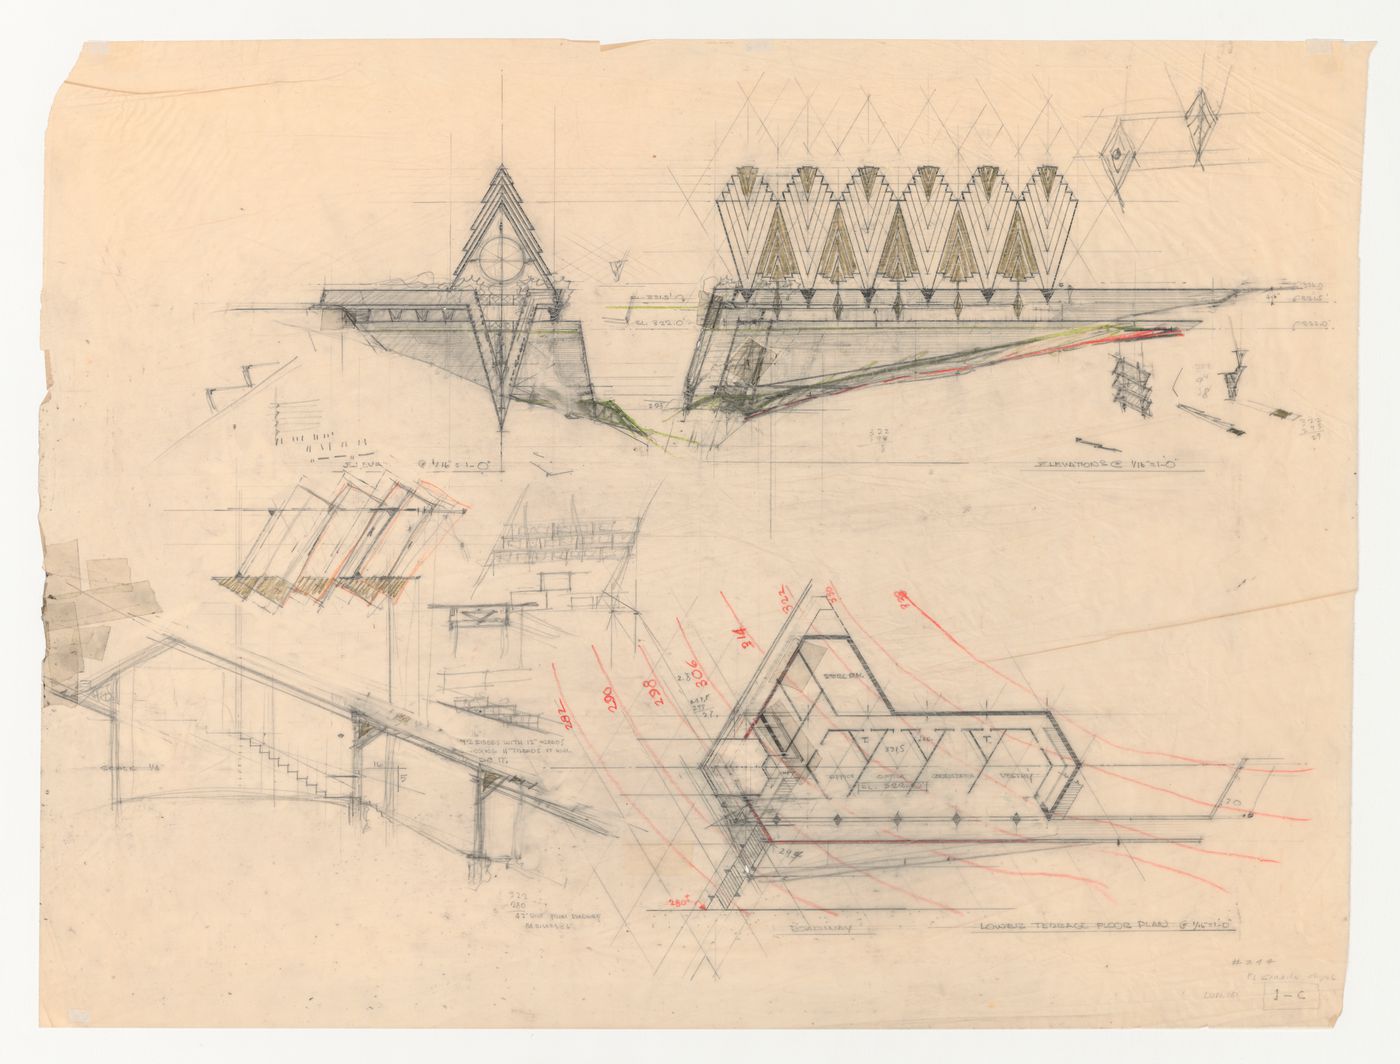 Swedenborg Memorial Chapel, El Cerrito, California: Elevations, plans and section for the chapel and covered walkway